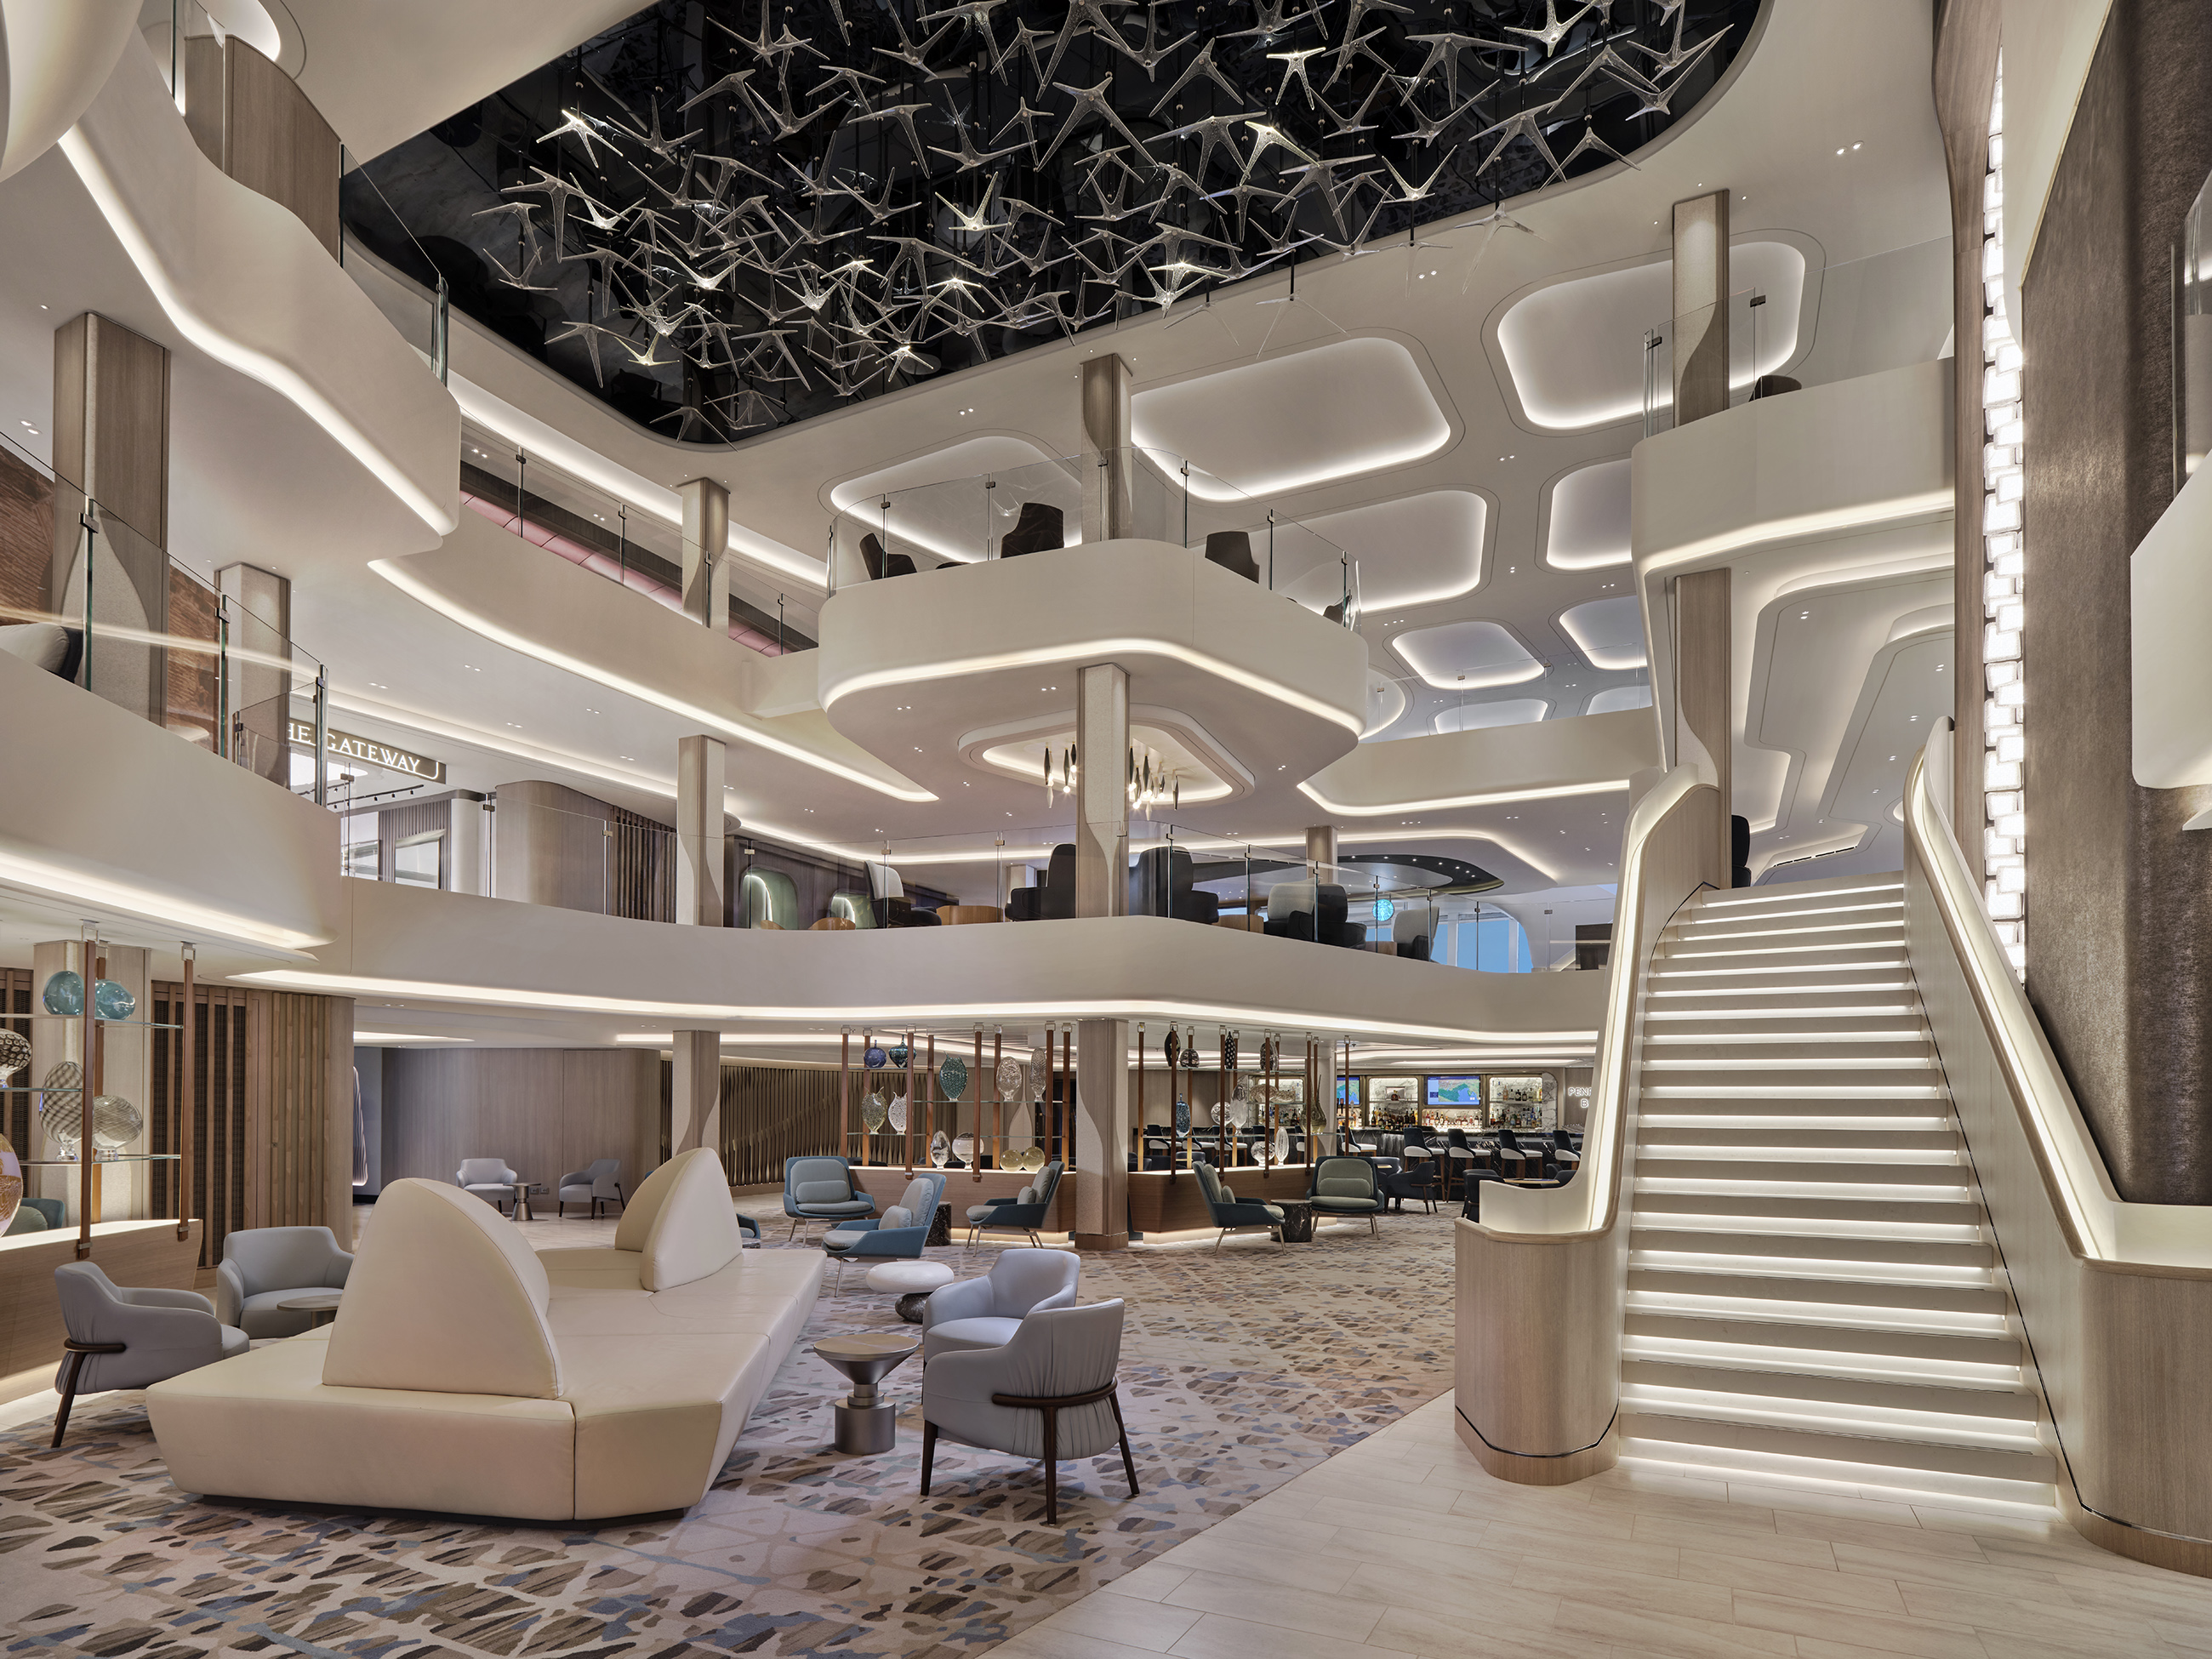 Norwegian Viva’s three-story atrium is anchored by a custom mural and a stunning chandelier reminiscent of stars in the night’s sky, making for an upscale and unforgettable first impression for embarking guests.